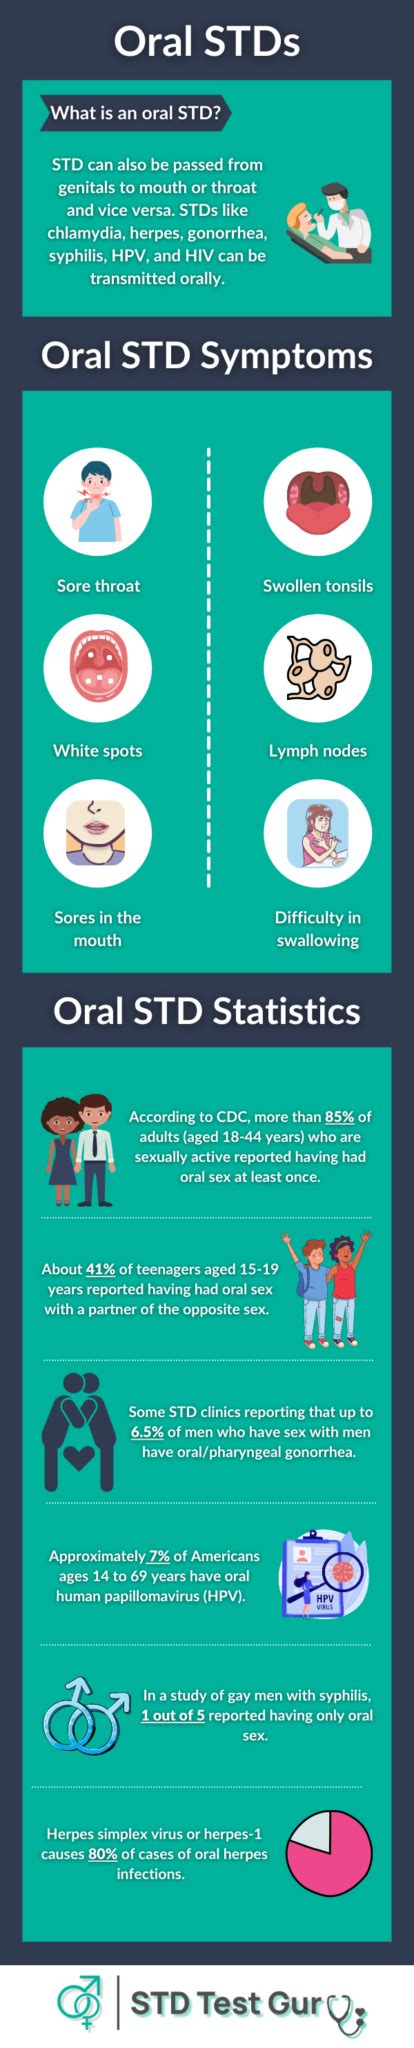 Stds And White Spots Tonsils Types Oral Std Symptoms And Treatment